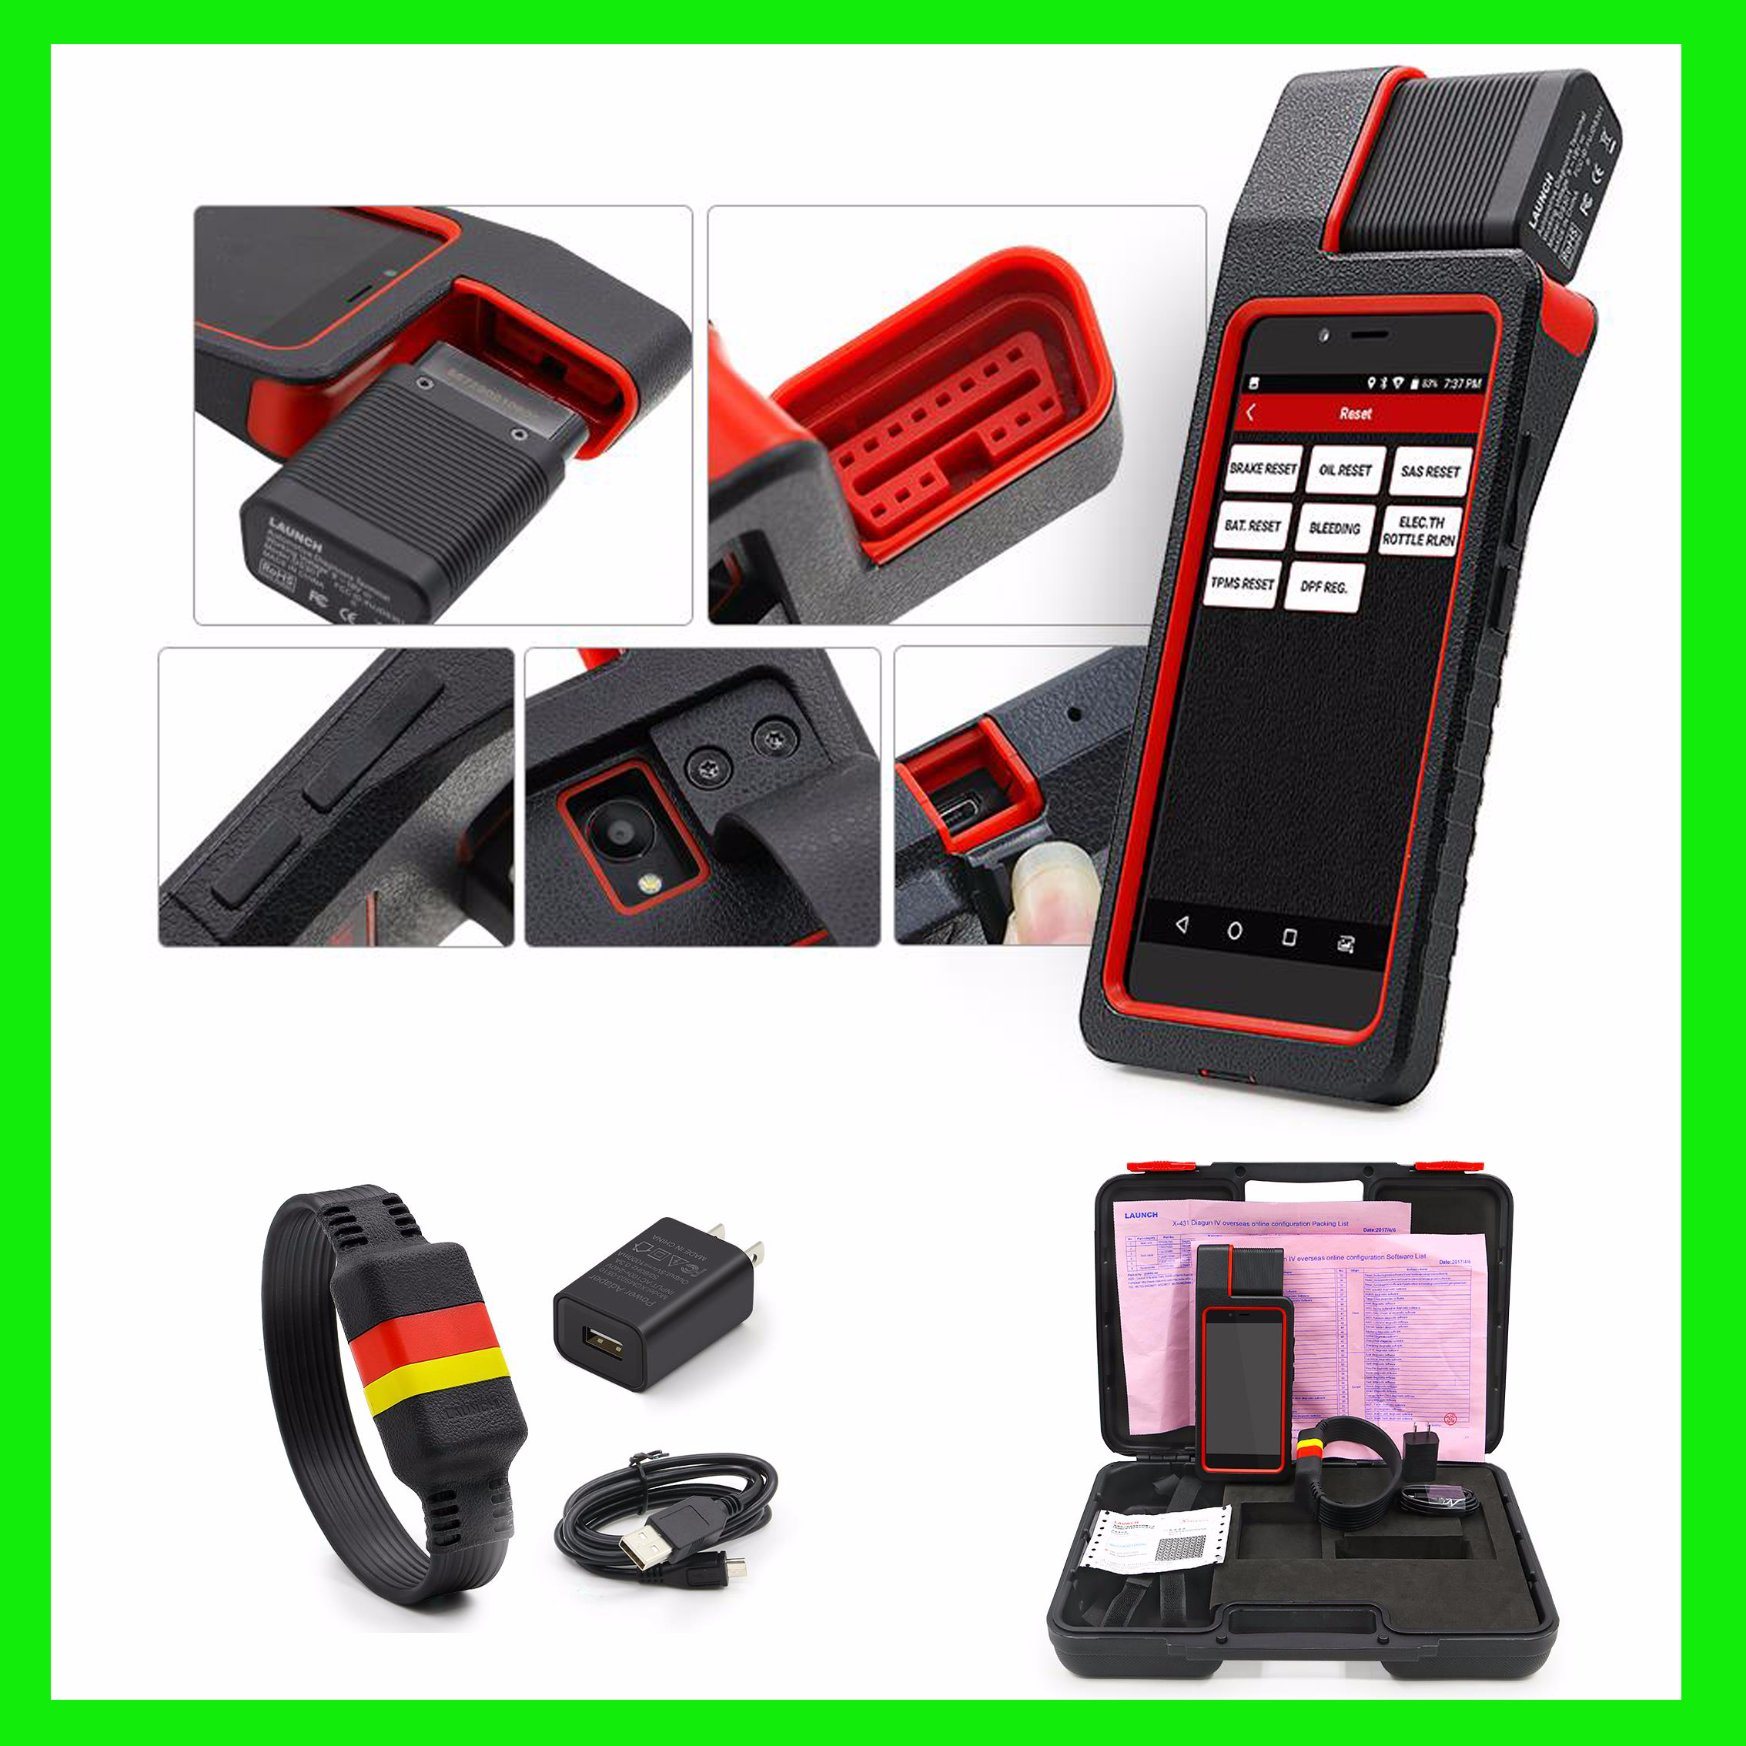 Auto Diagnostic Tool/Car Diagnostic/2017 New Released Launch X431 Diagun IV Diagnotist Tool with 2 Years Free Update X-431 Diagun IV Scanner